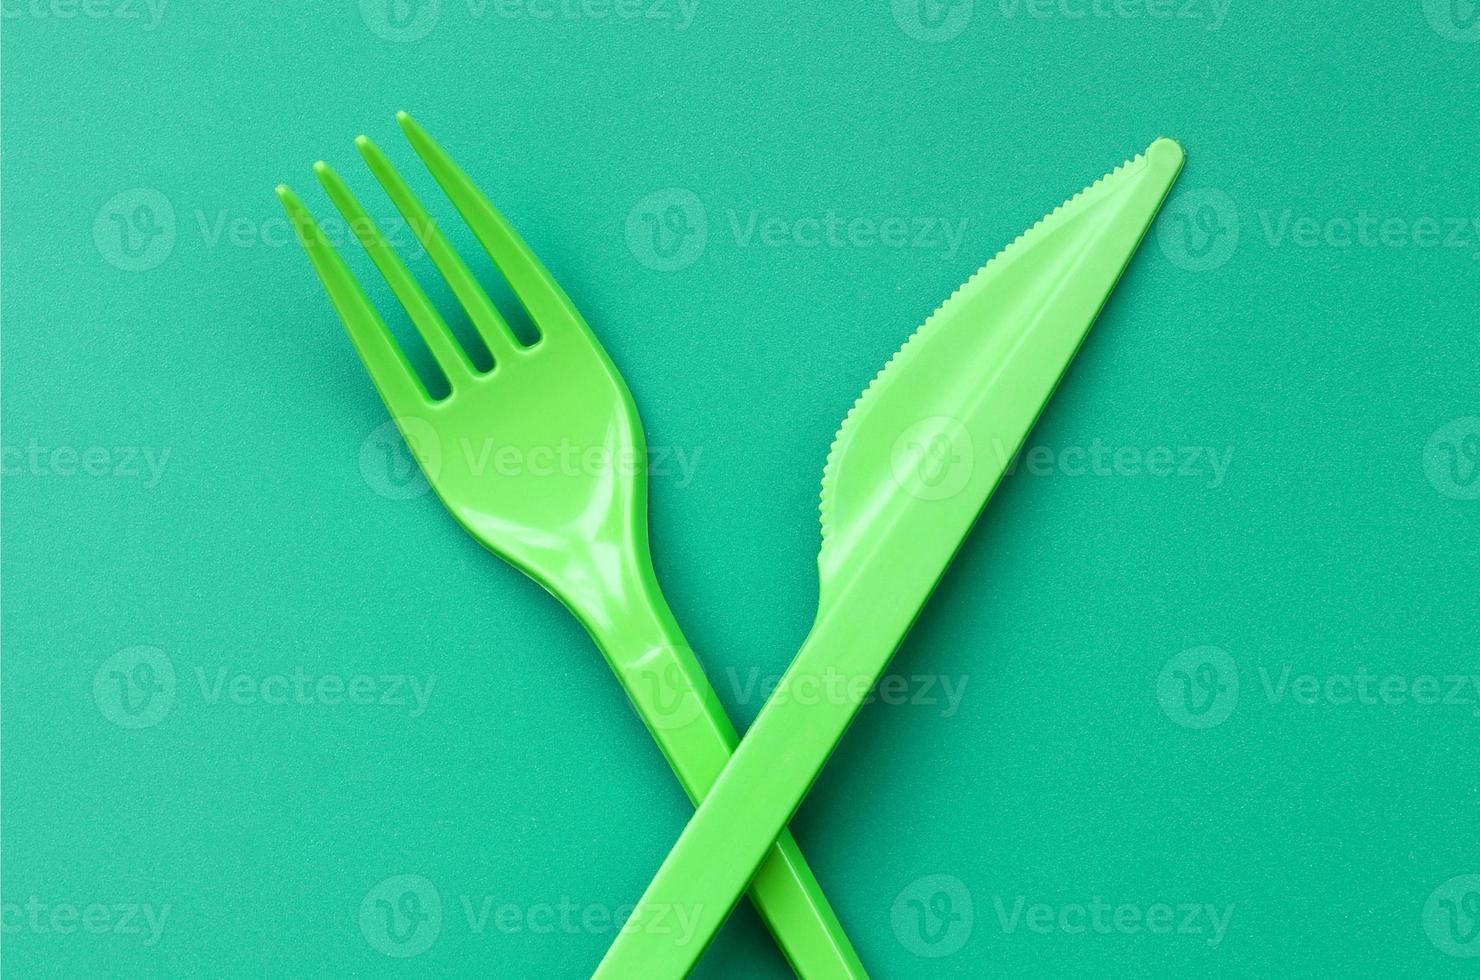 Disposable plastic cutlery green. Plastic fork and knife lie on a green background surface photo